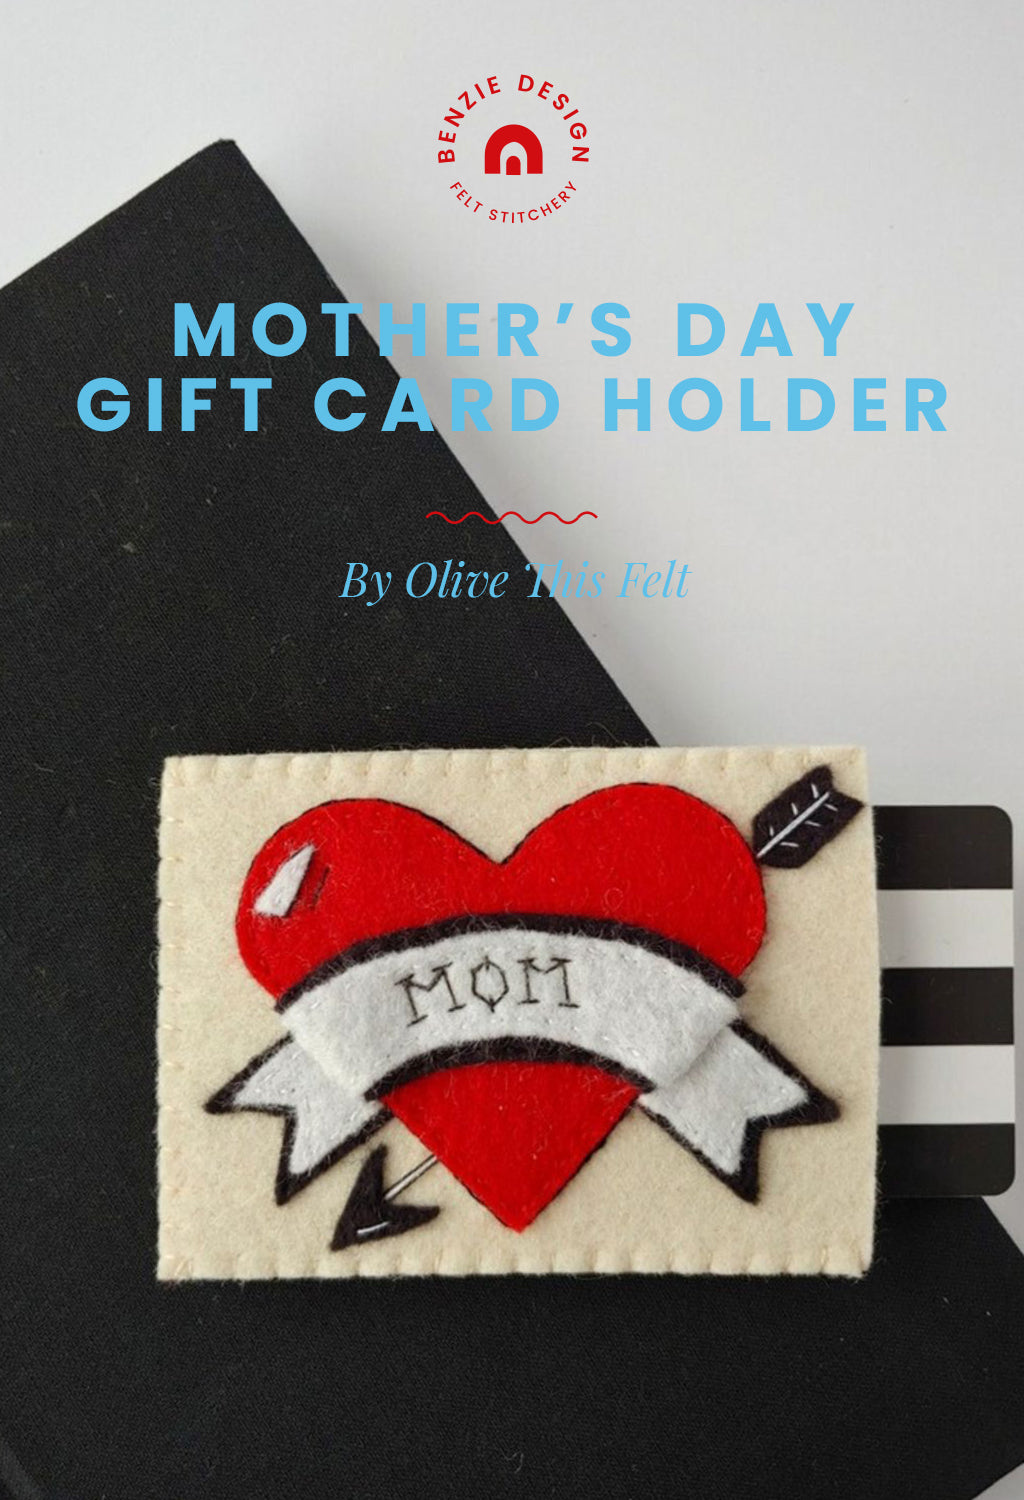 Mother's Day Gift Card Holder tutorial